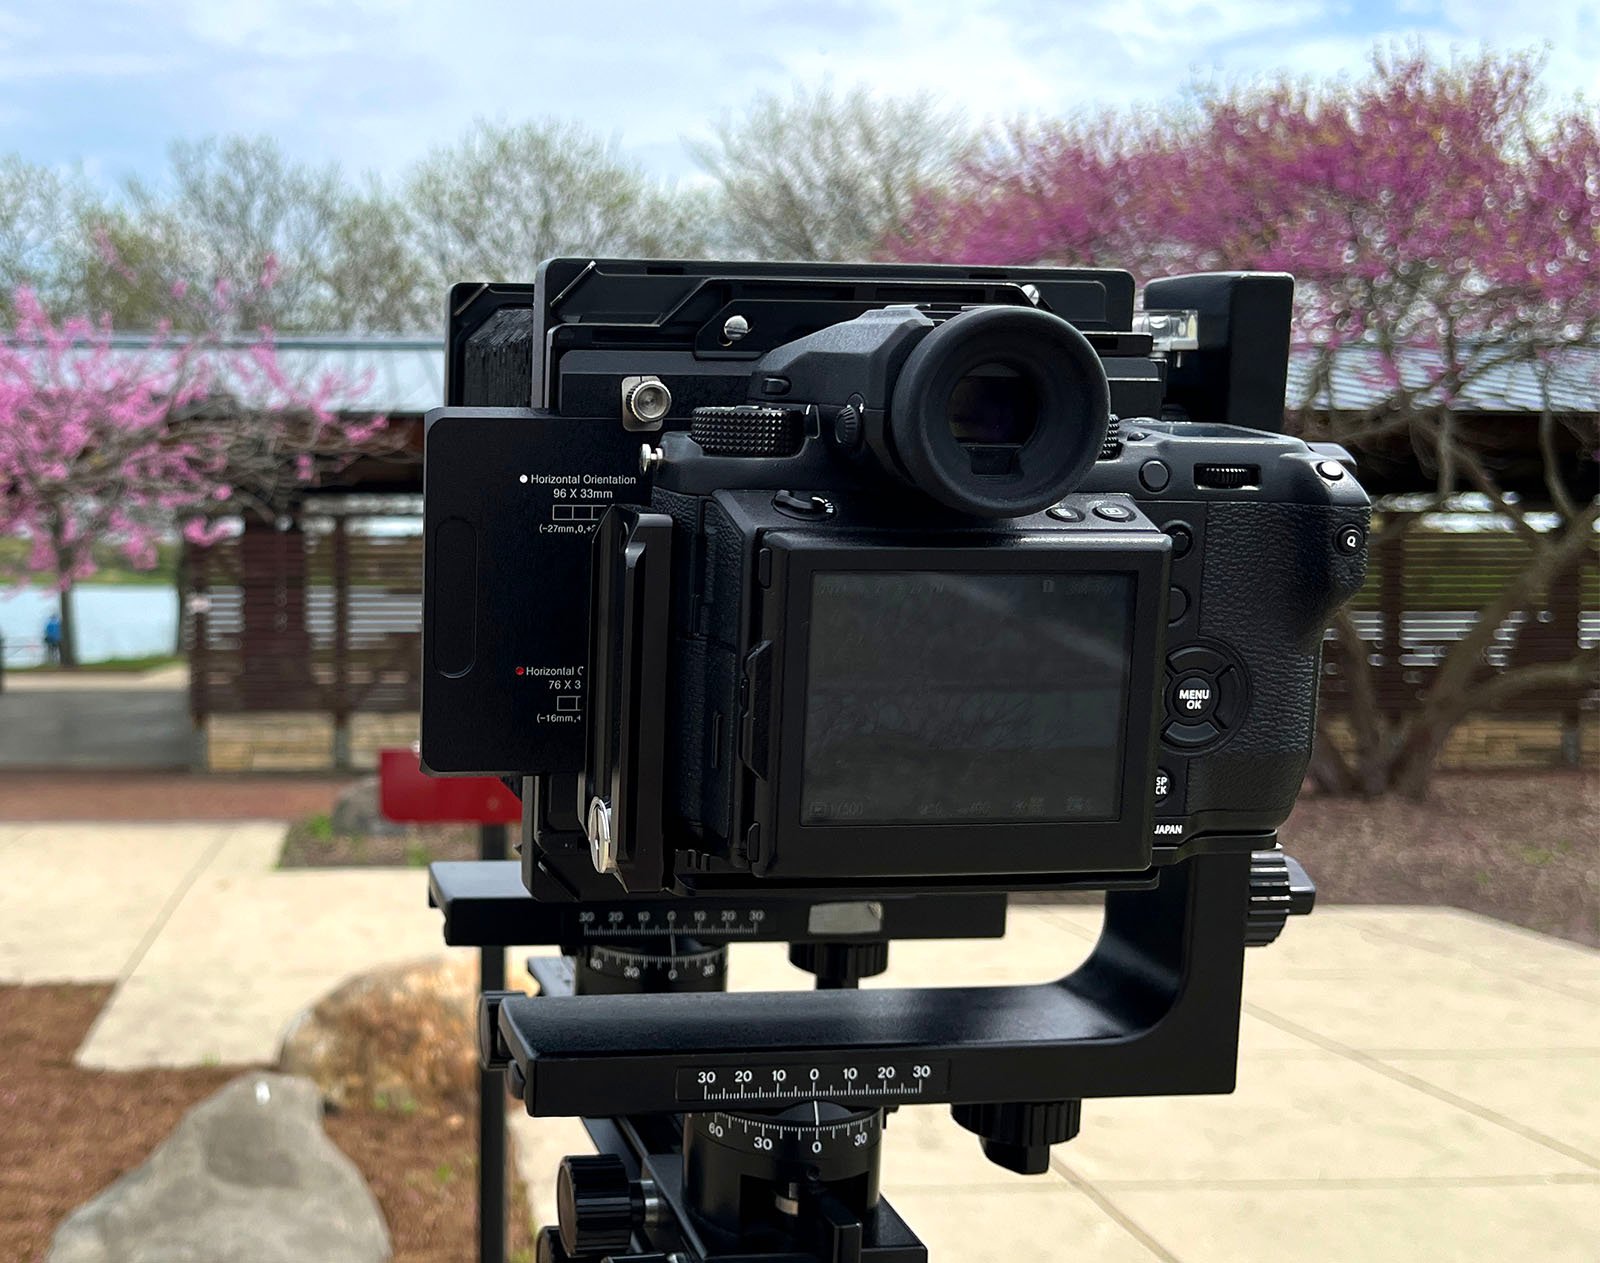 A professional digital camera mounted on a tripod, facing a scene of blooming pink cherry trees in an outdoor park.